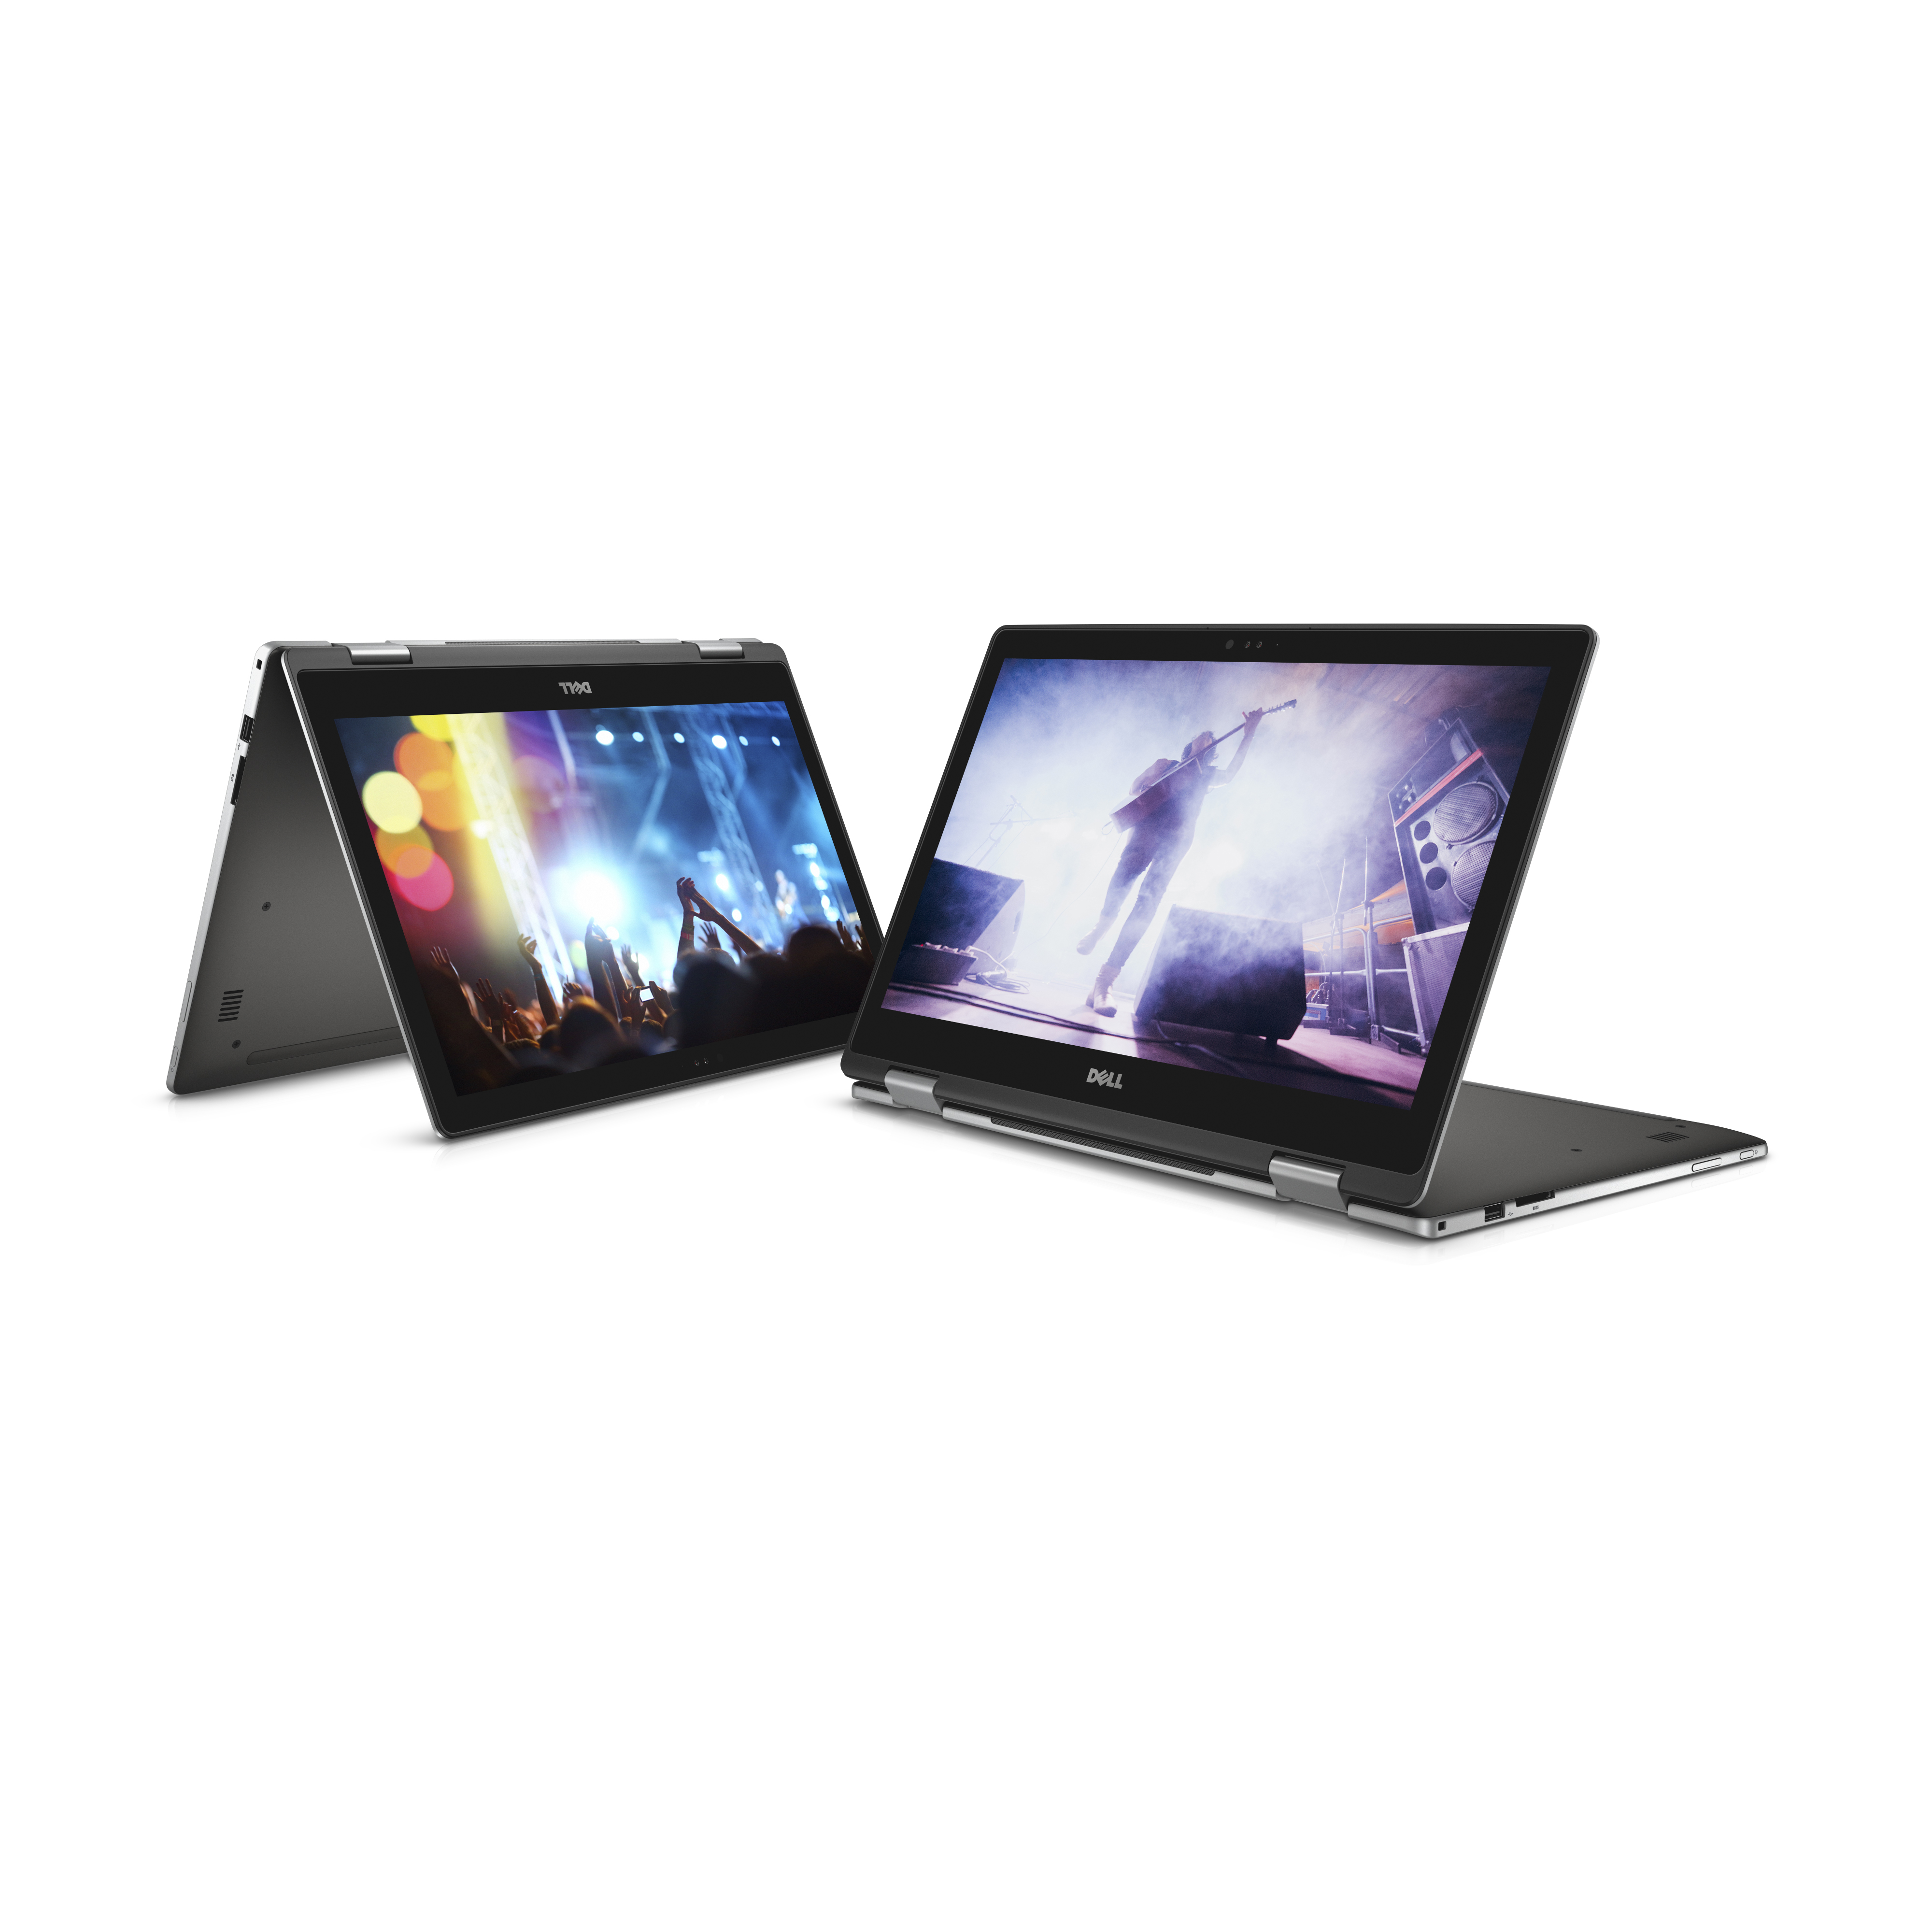 Dell announces new Windows 10 2-in-1 laptops starting at $249 | Windows  Experience Blog